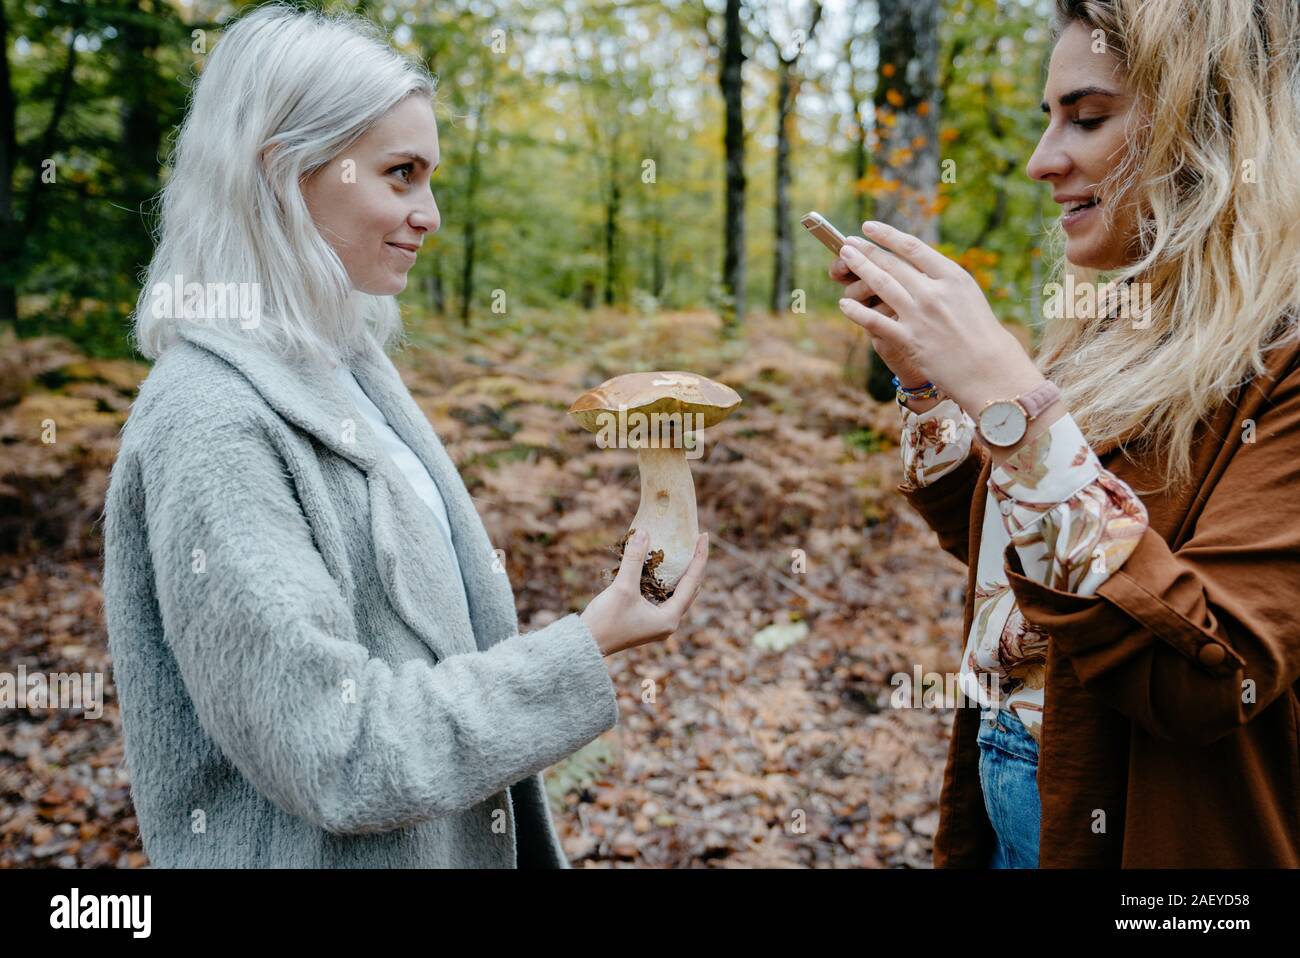 Two young women taking snapshot of a mushroom in a forest Stock Photo